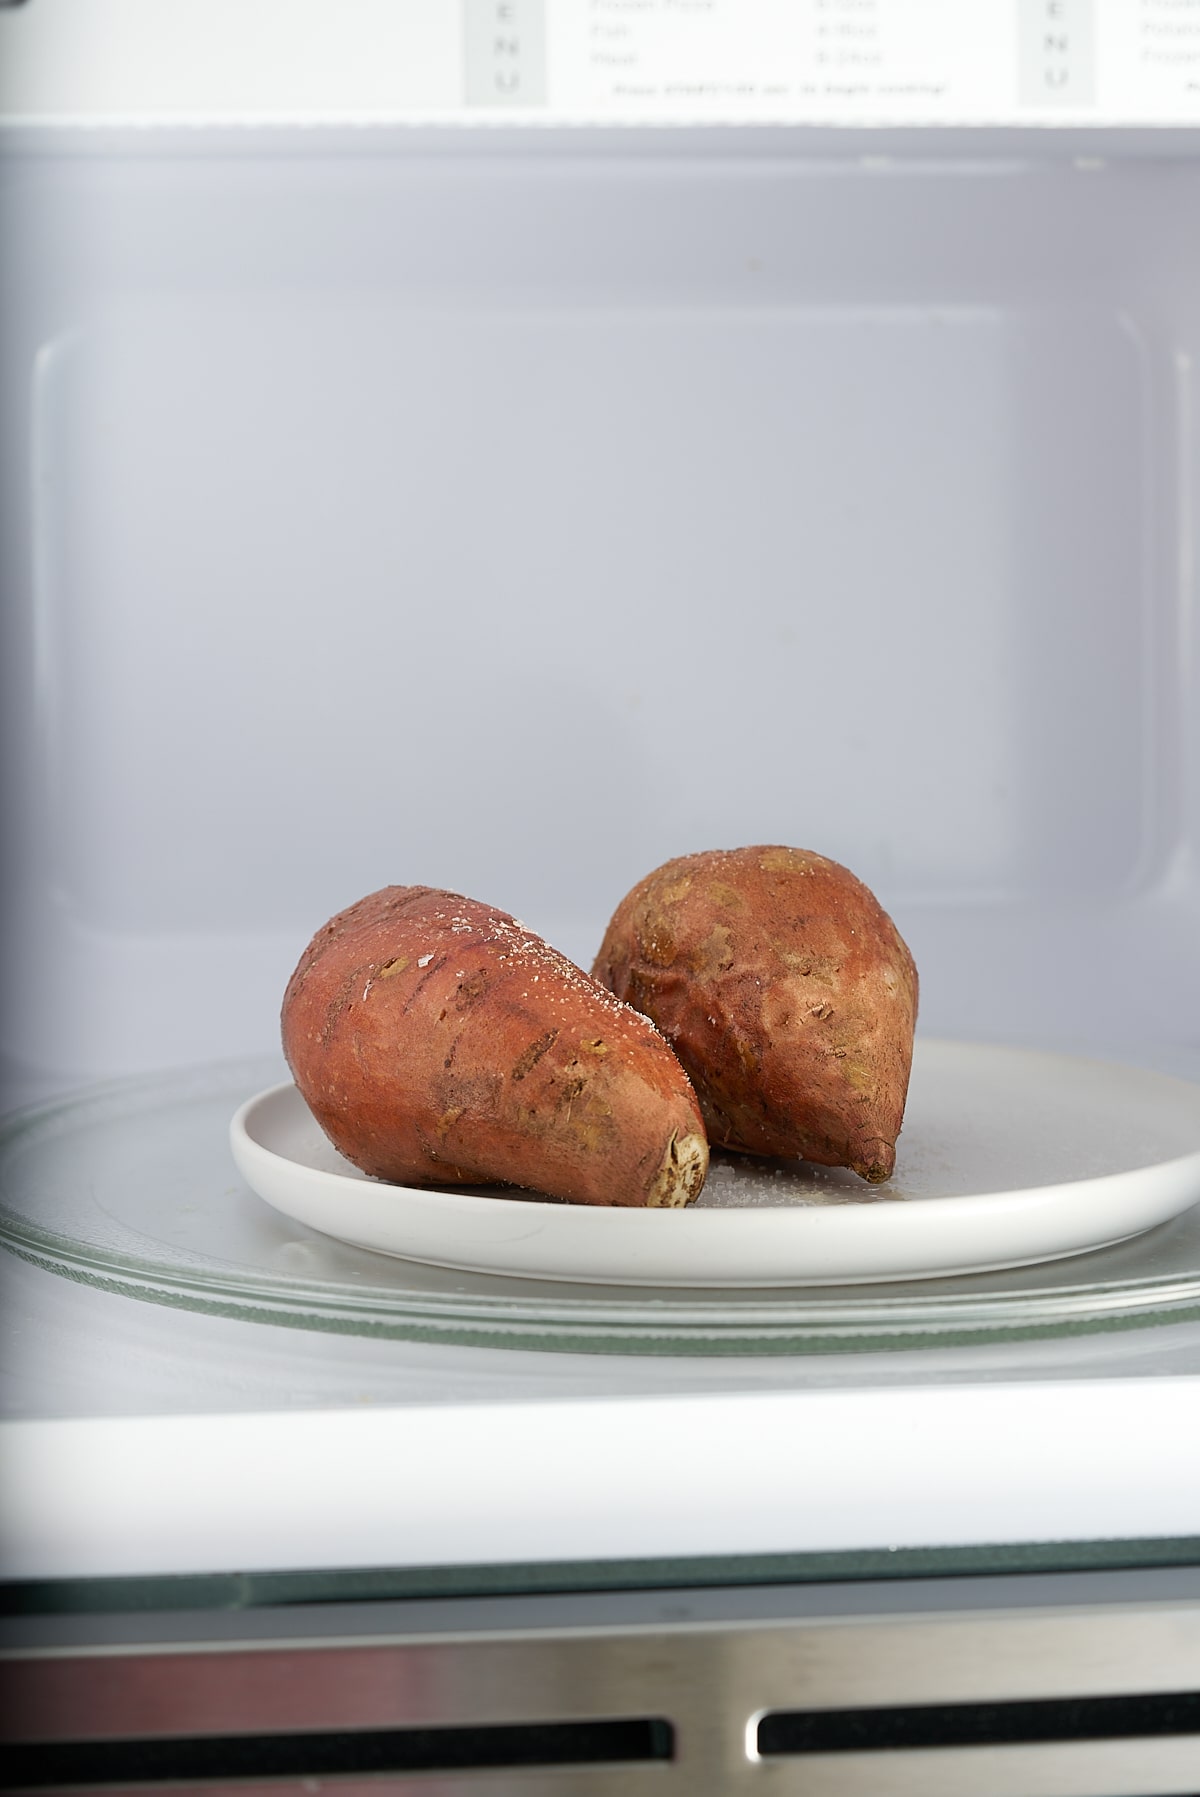 Two sweet potatoes on a plate in the microwave.